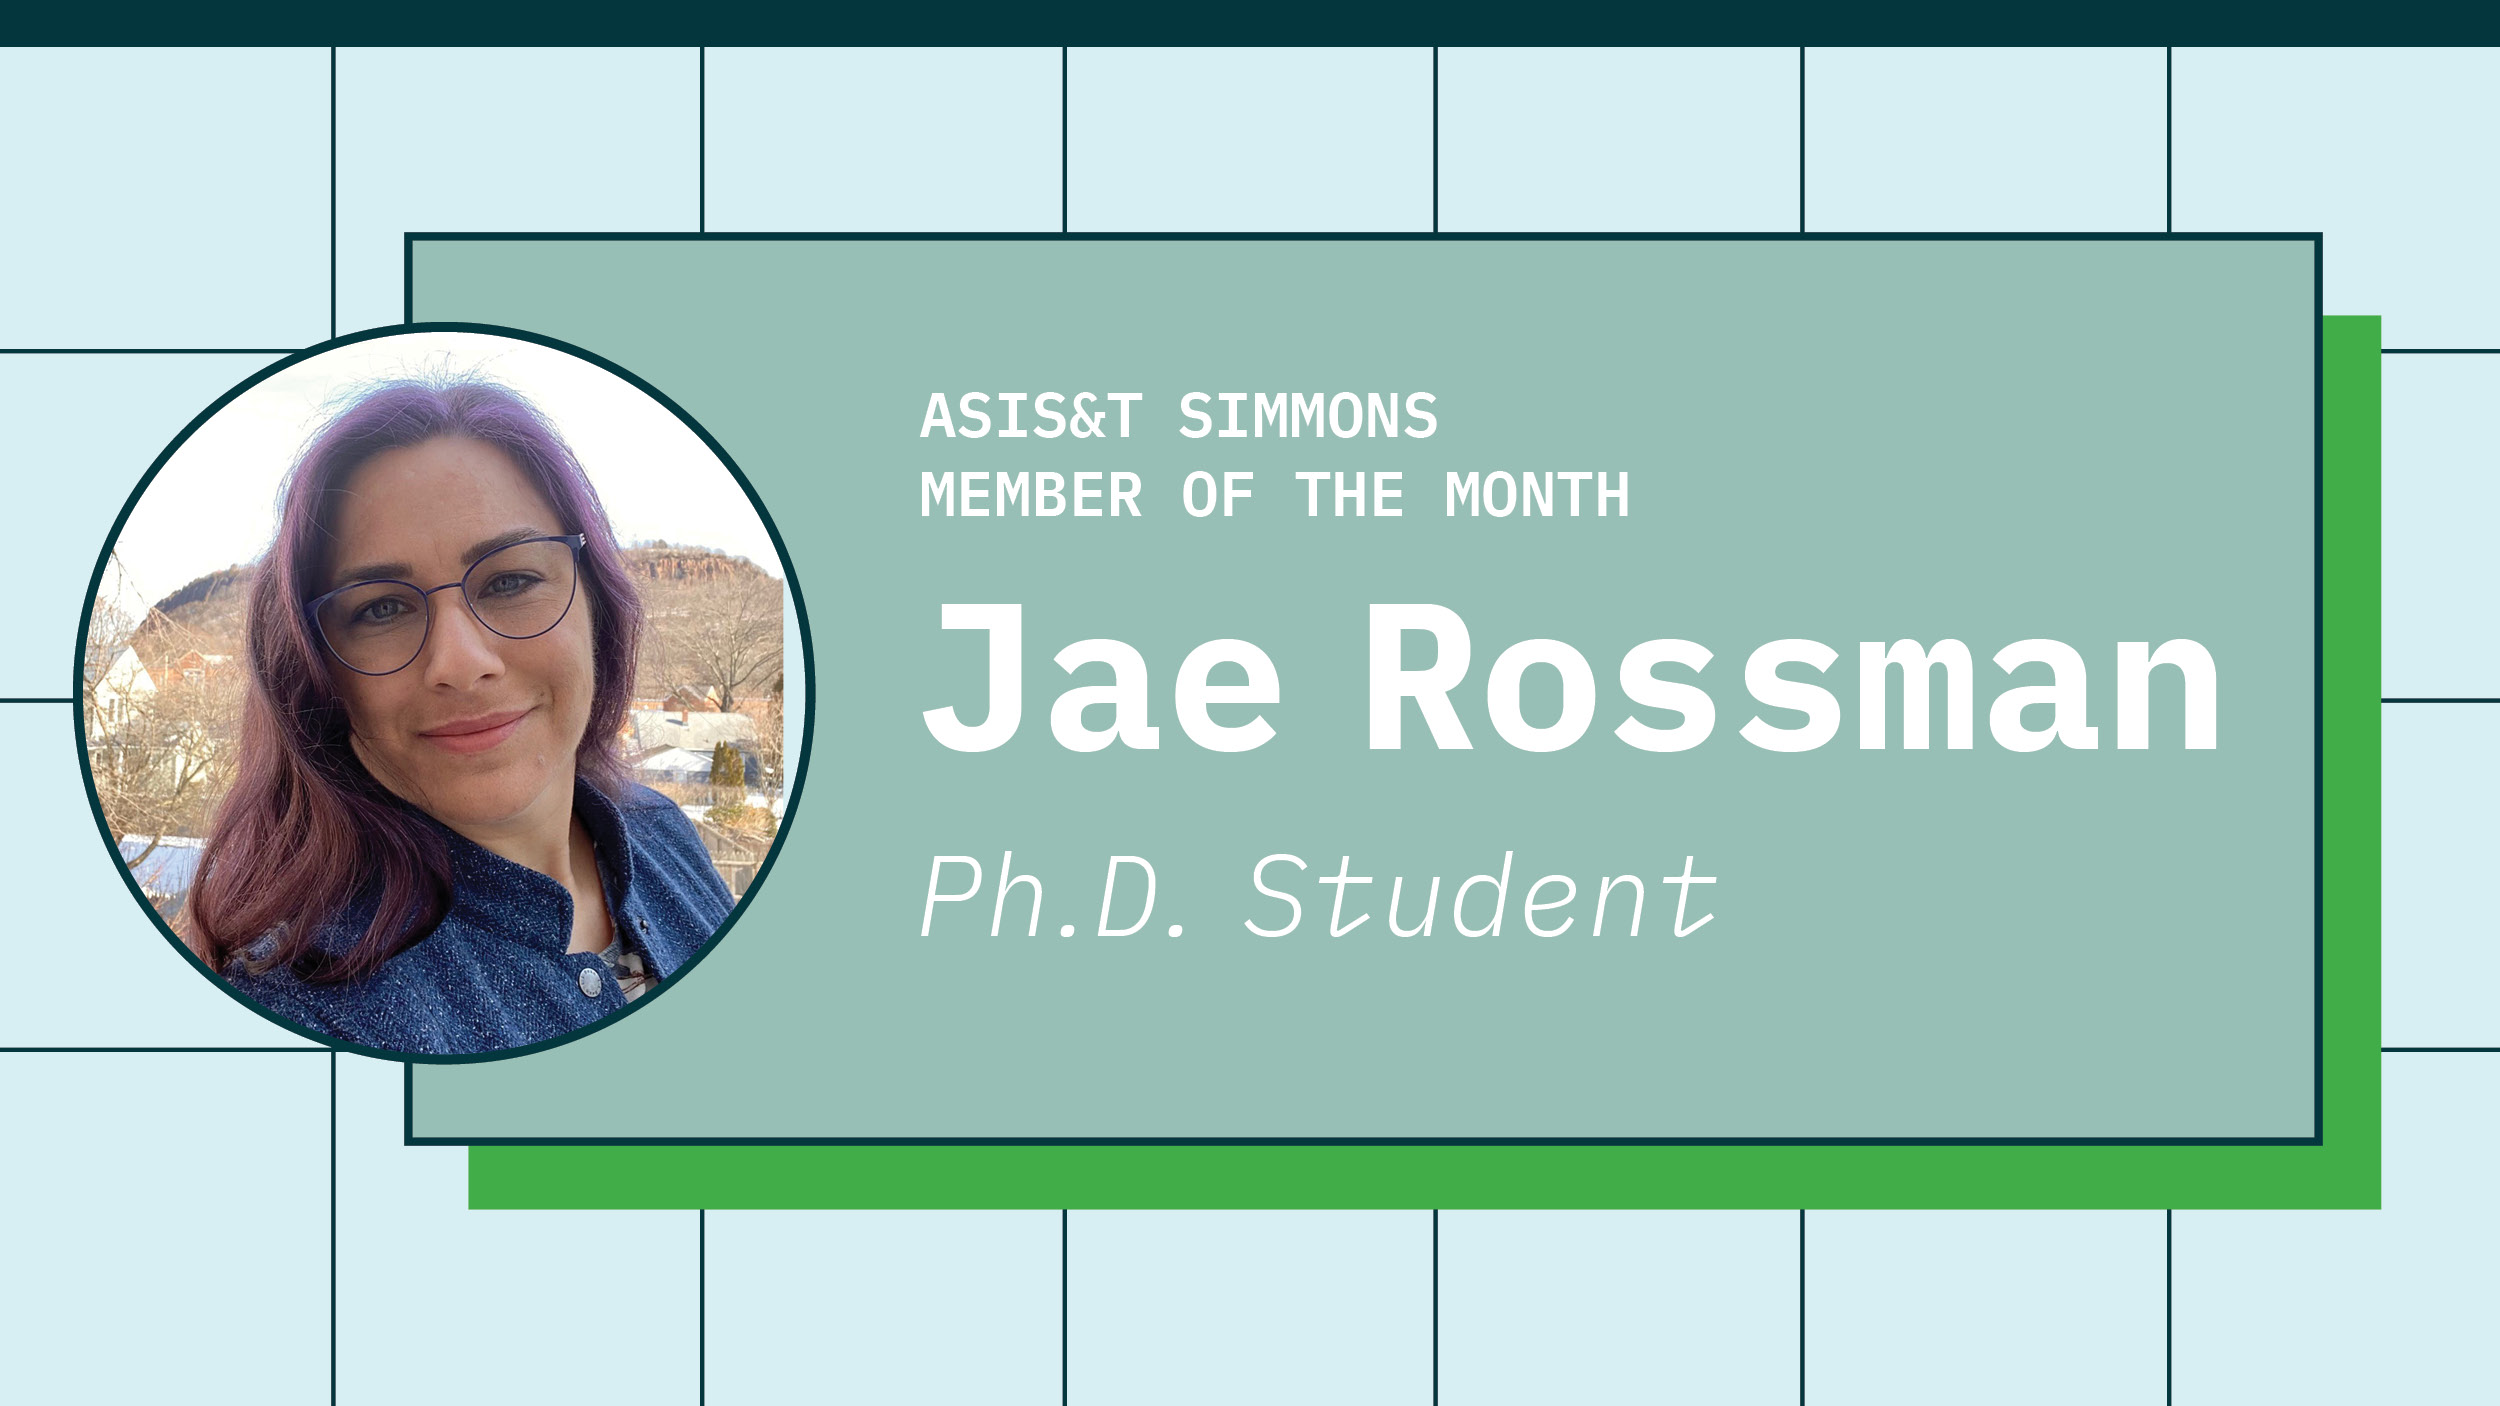 ASIS&amp;T Simmons Member of the month: Jae Rossman, Ph.D. Student. Includes profile picture of Jae.